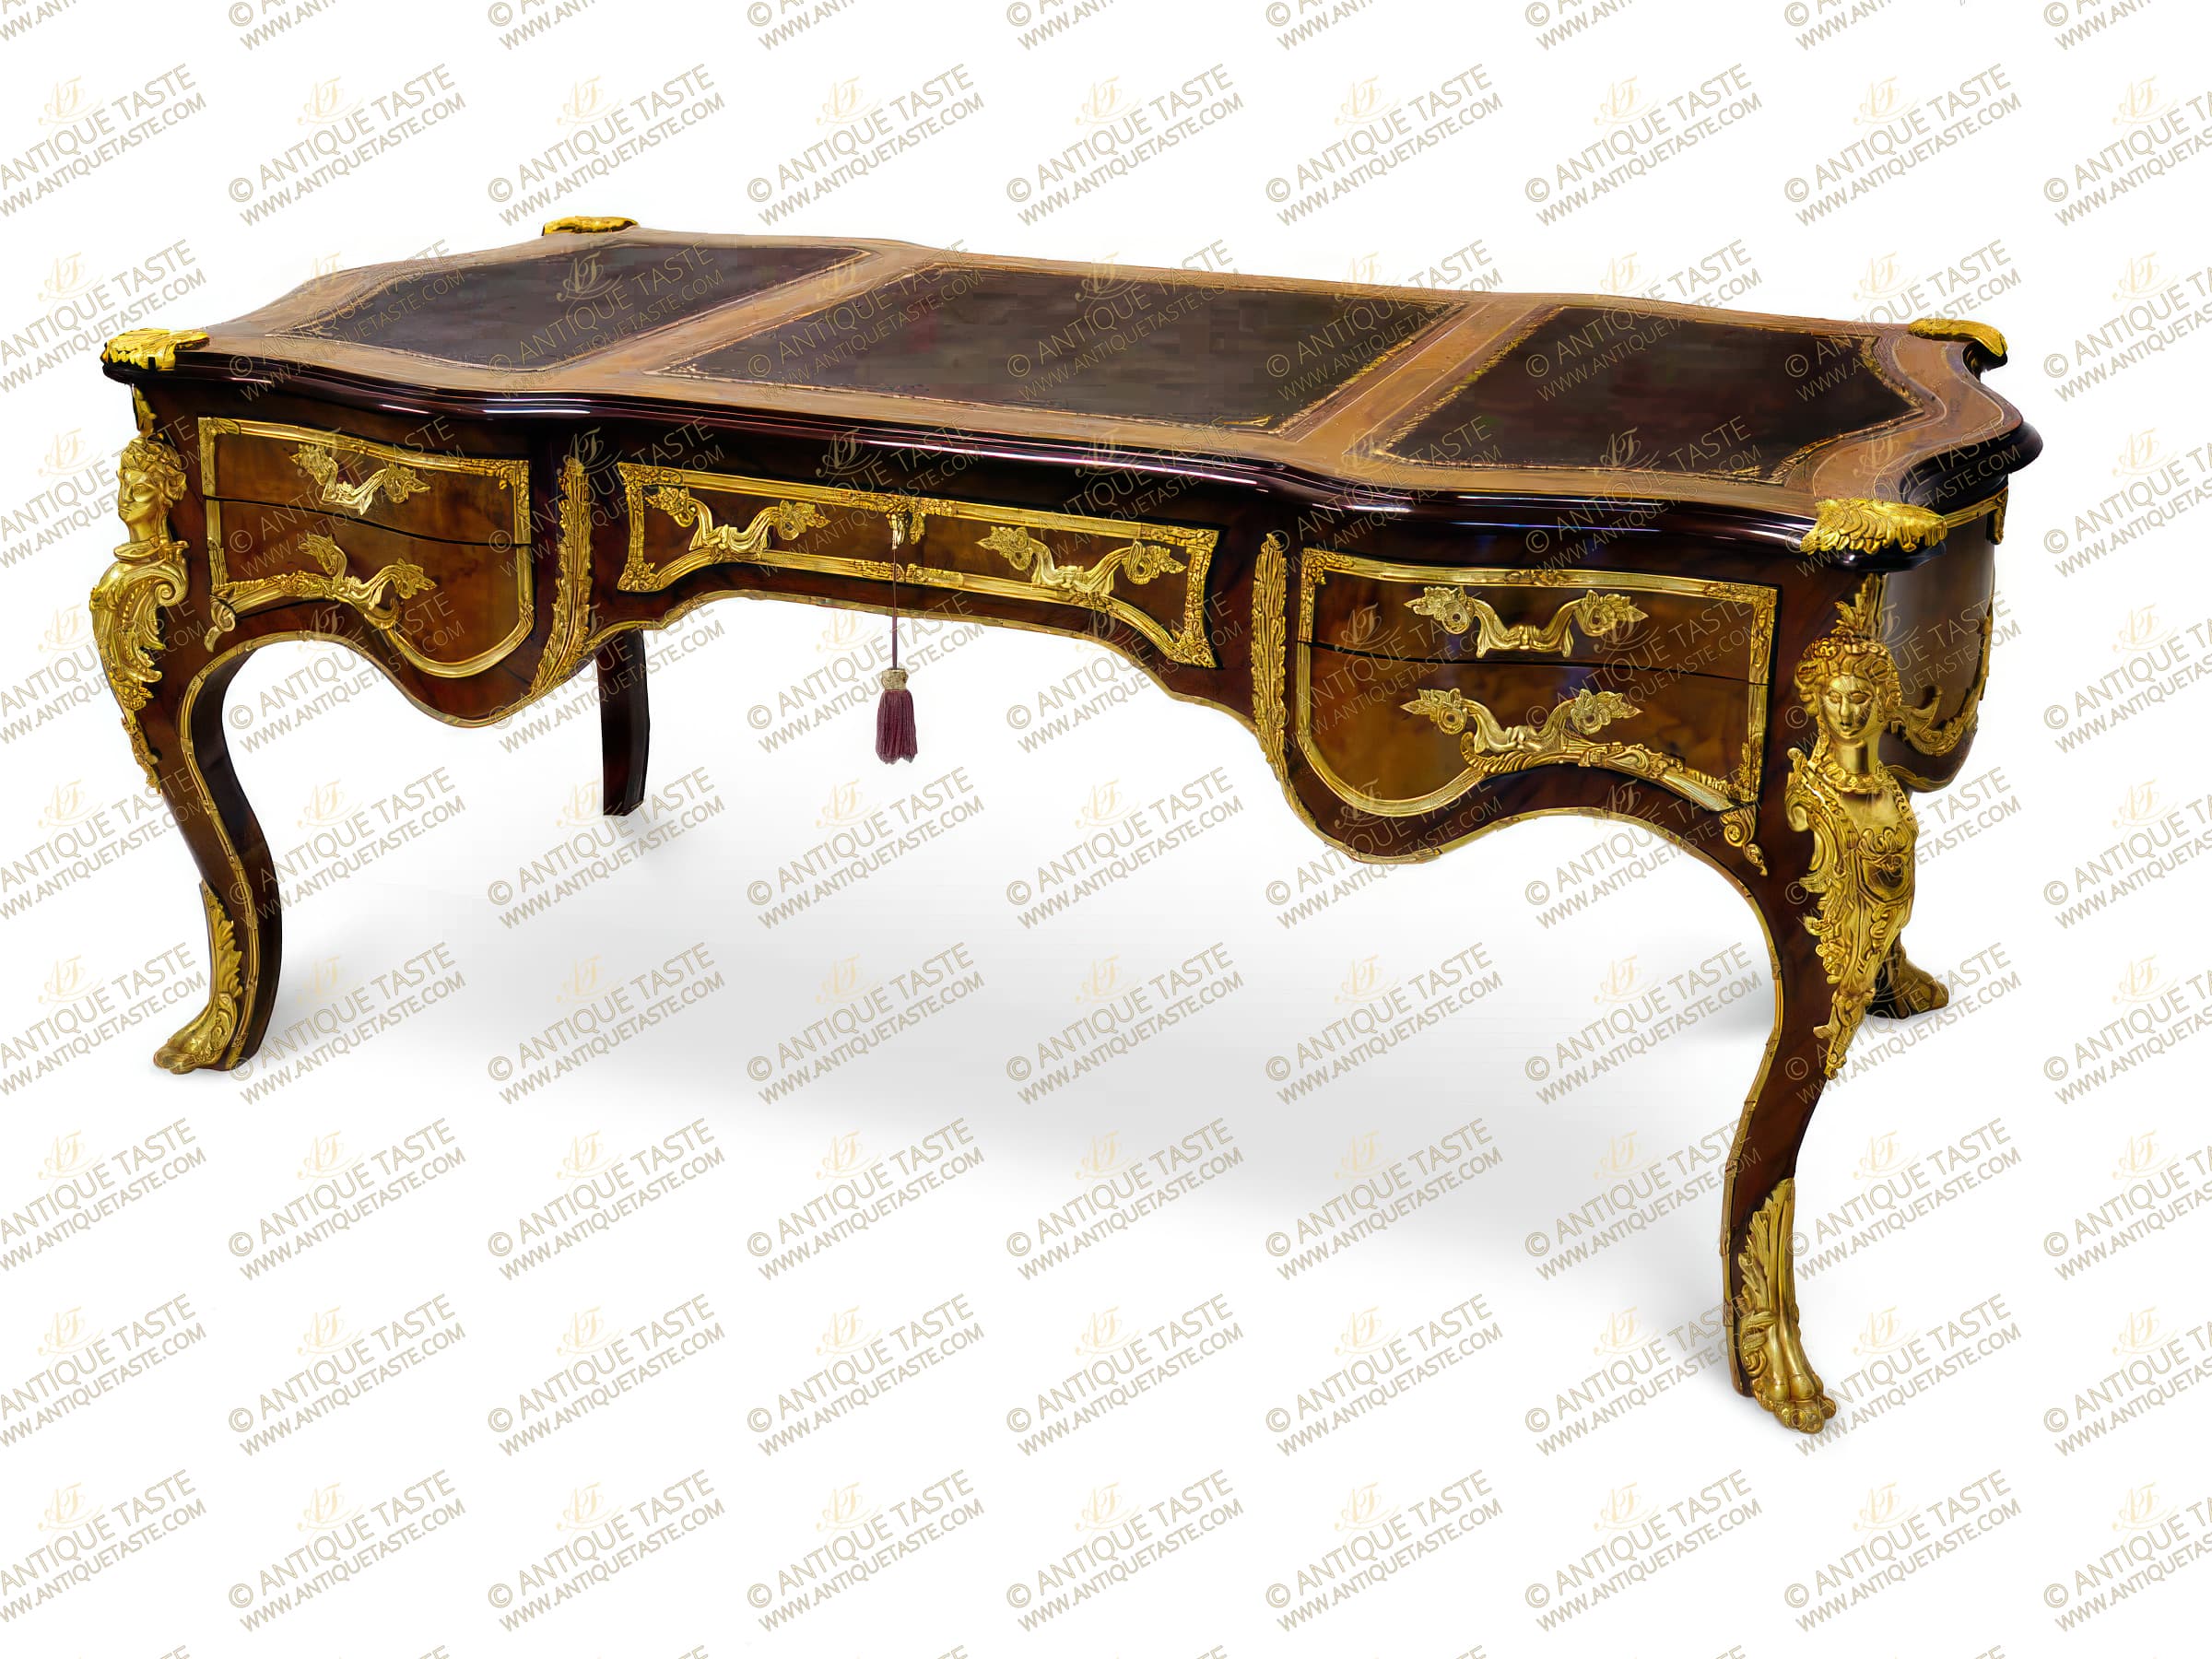 French 19th century Louis XV style ormolu mounted Executive Bureau Plat after a model by François Linke